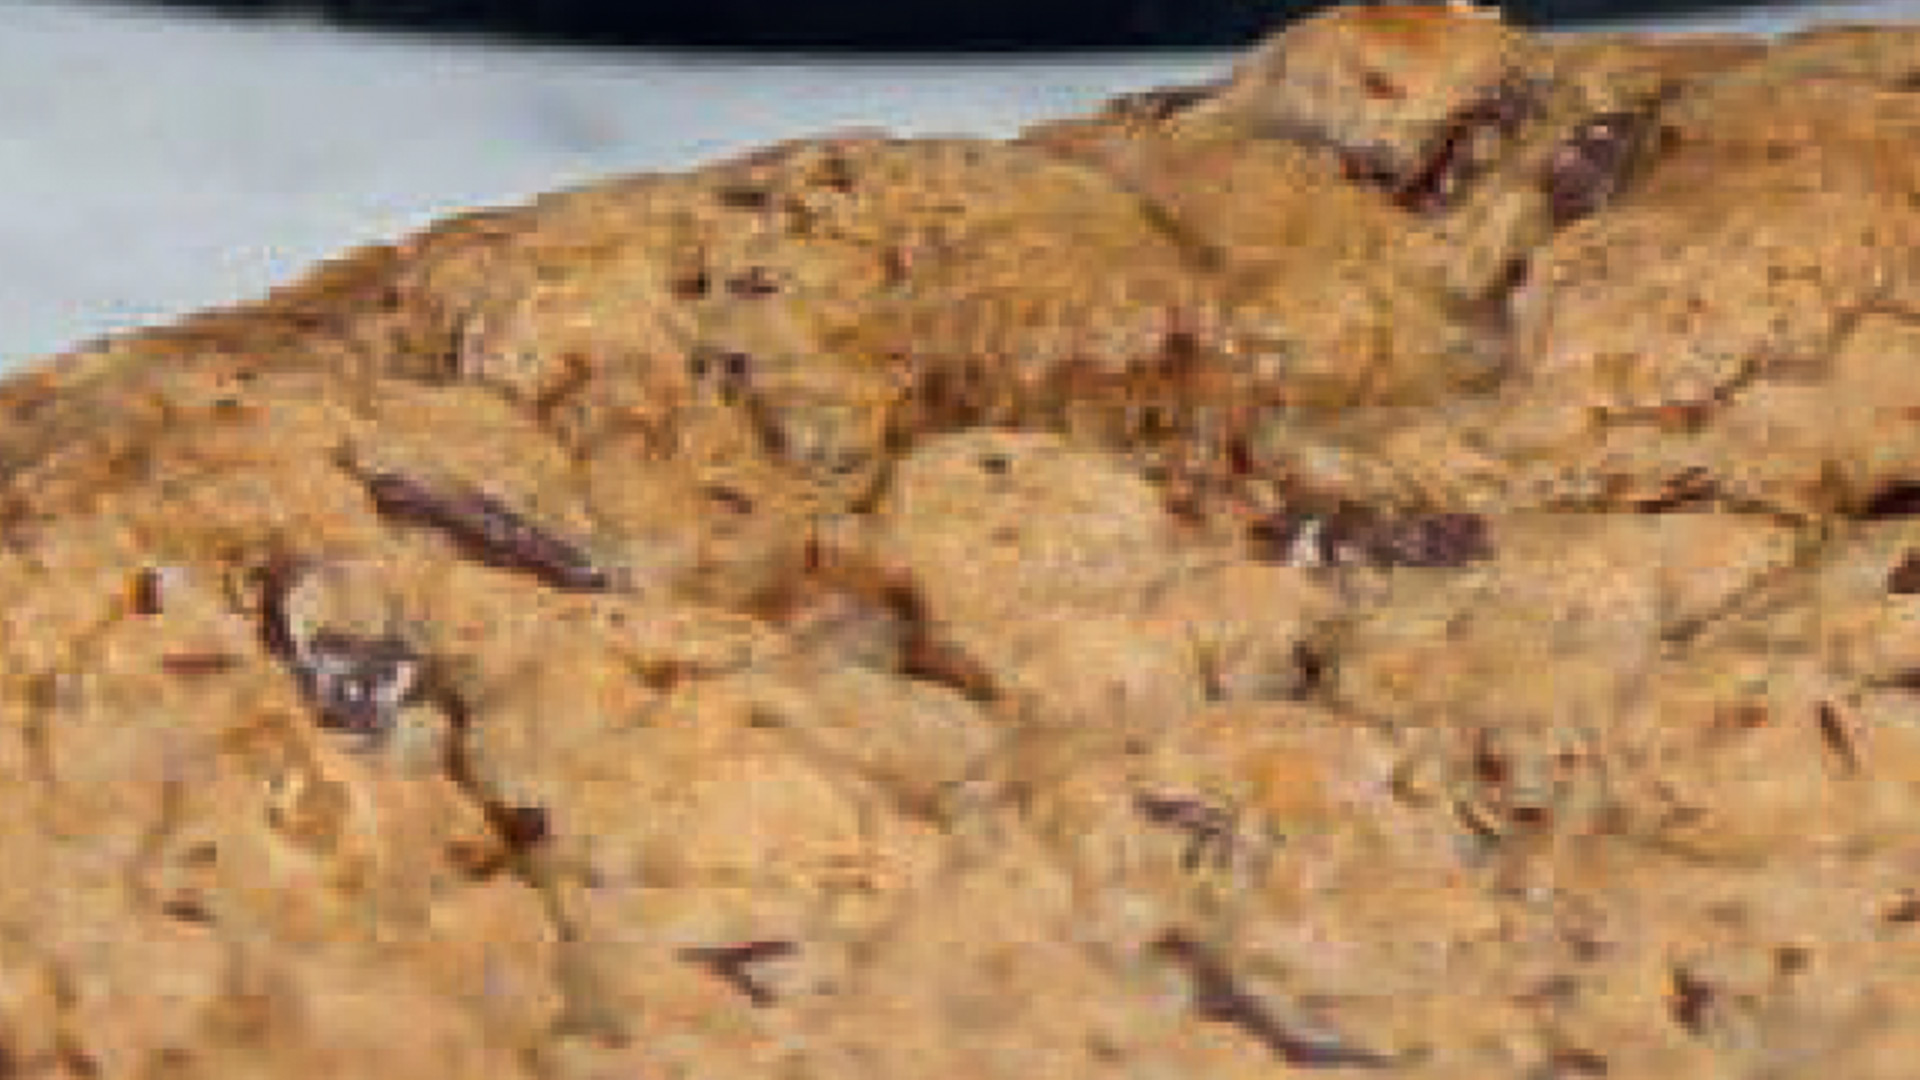 JJR’s Chocolate Chip Cookiesarticle featured image thumbnail.